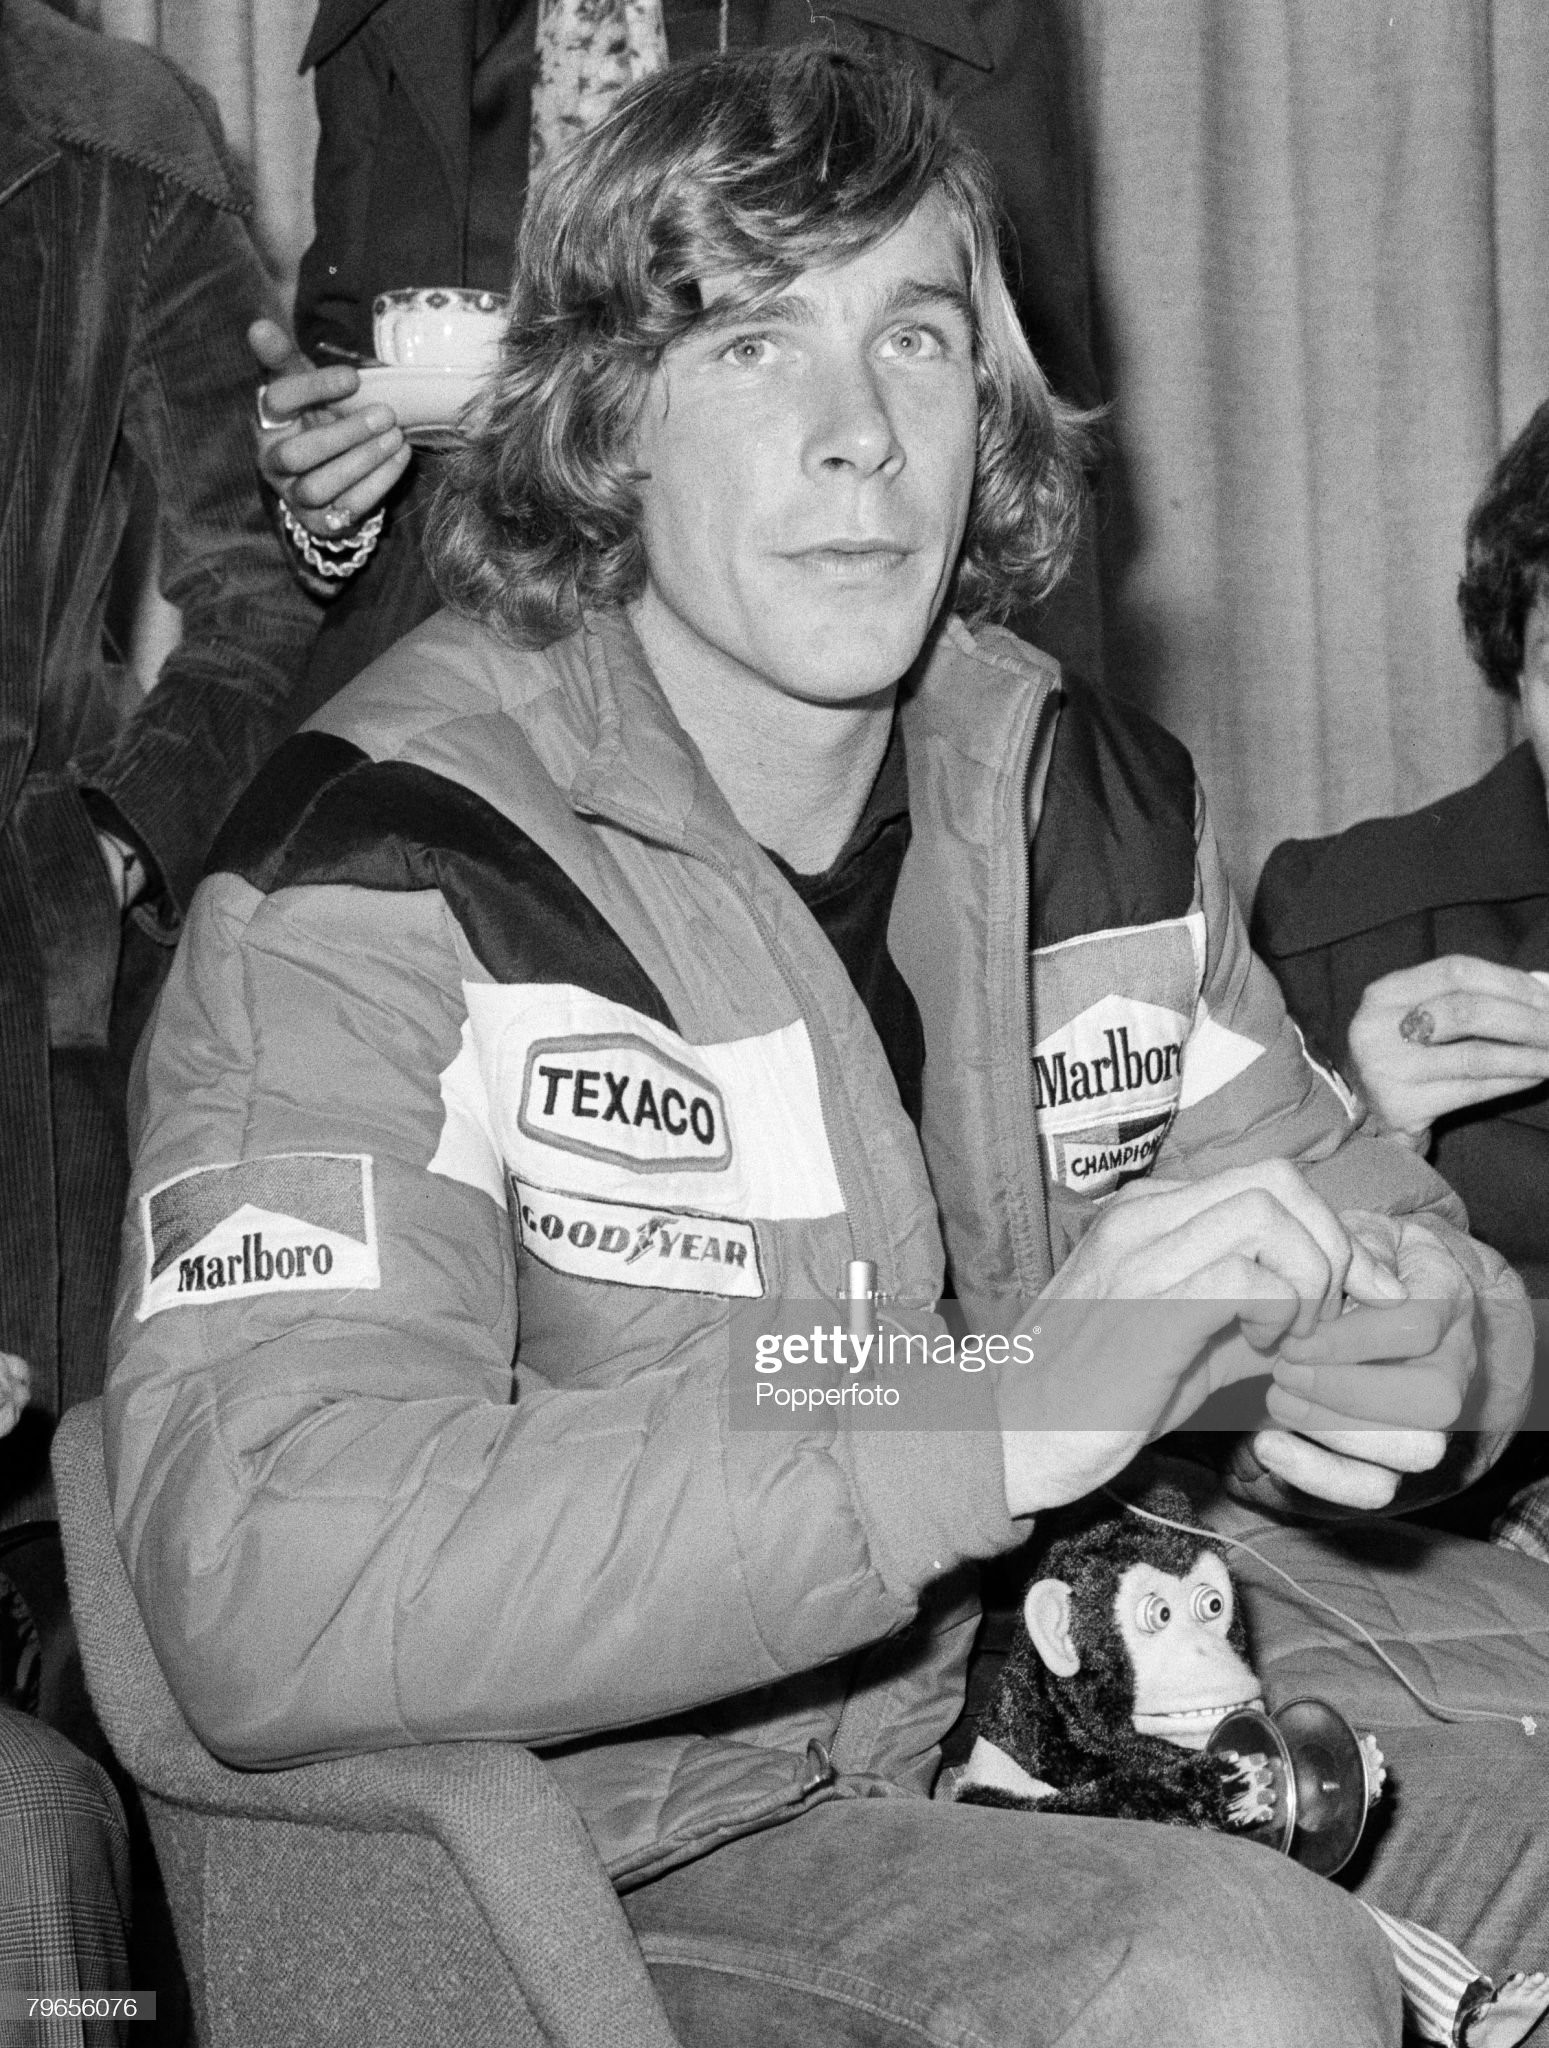 Sport, Motor Racing, London, England, 26th October 1976, Britain's new World Champion James Hunt at Heathrow airport after arriving from Tokyo where he won the Formula One World Championship title. 